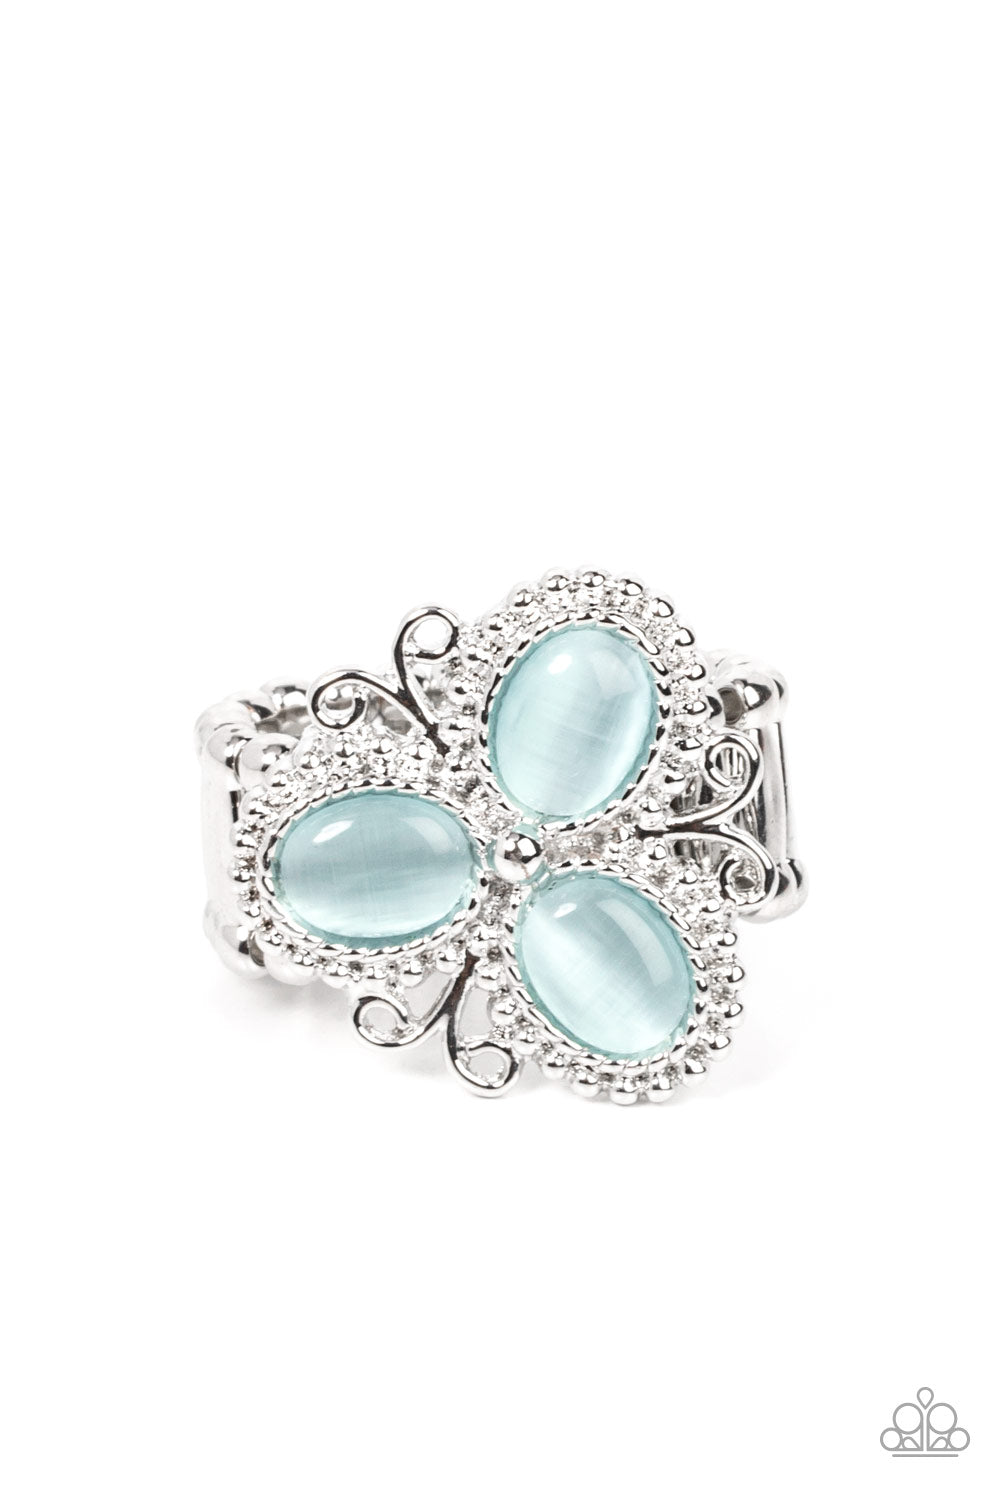 Paparazzi - Bewitched Blossoms - Blue Ring